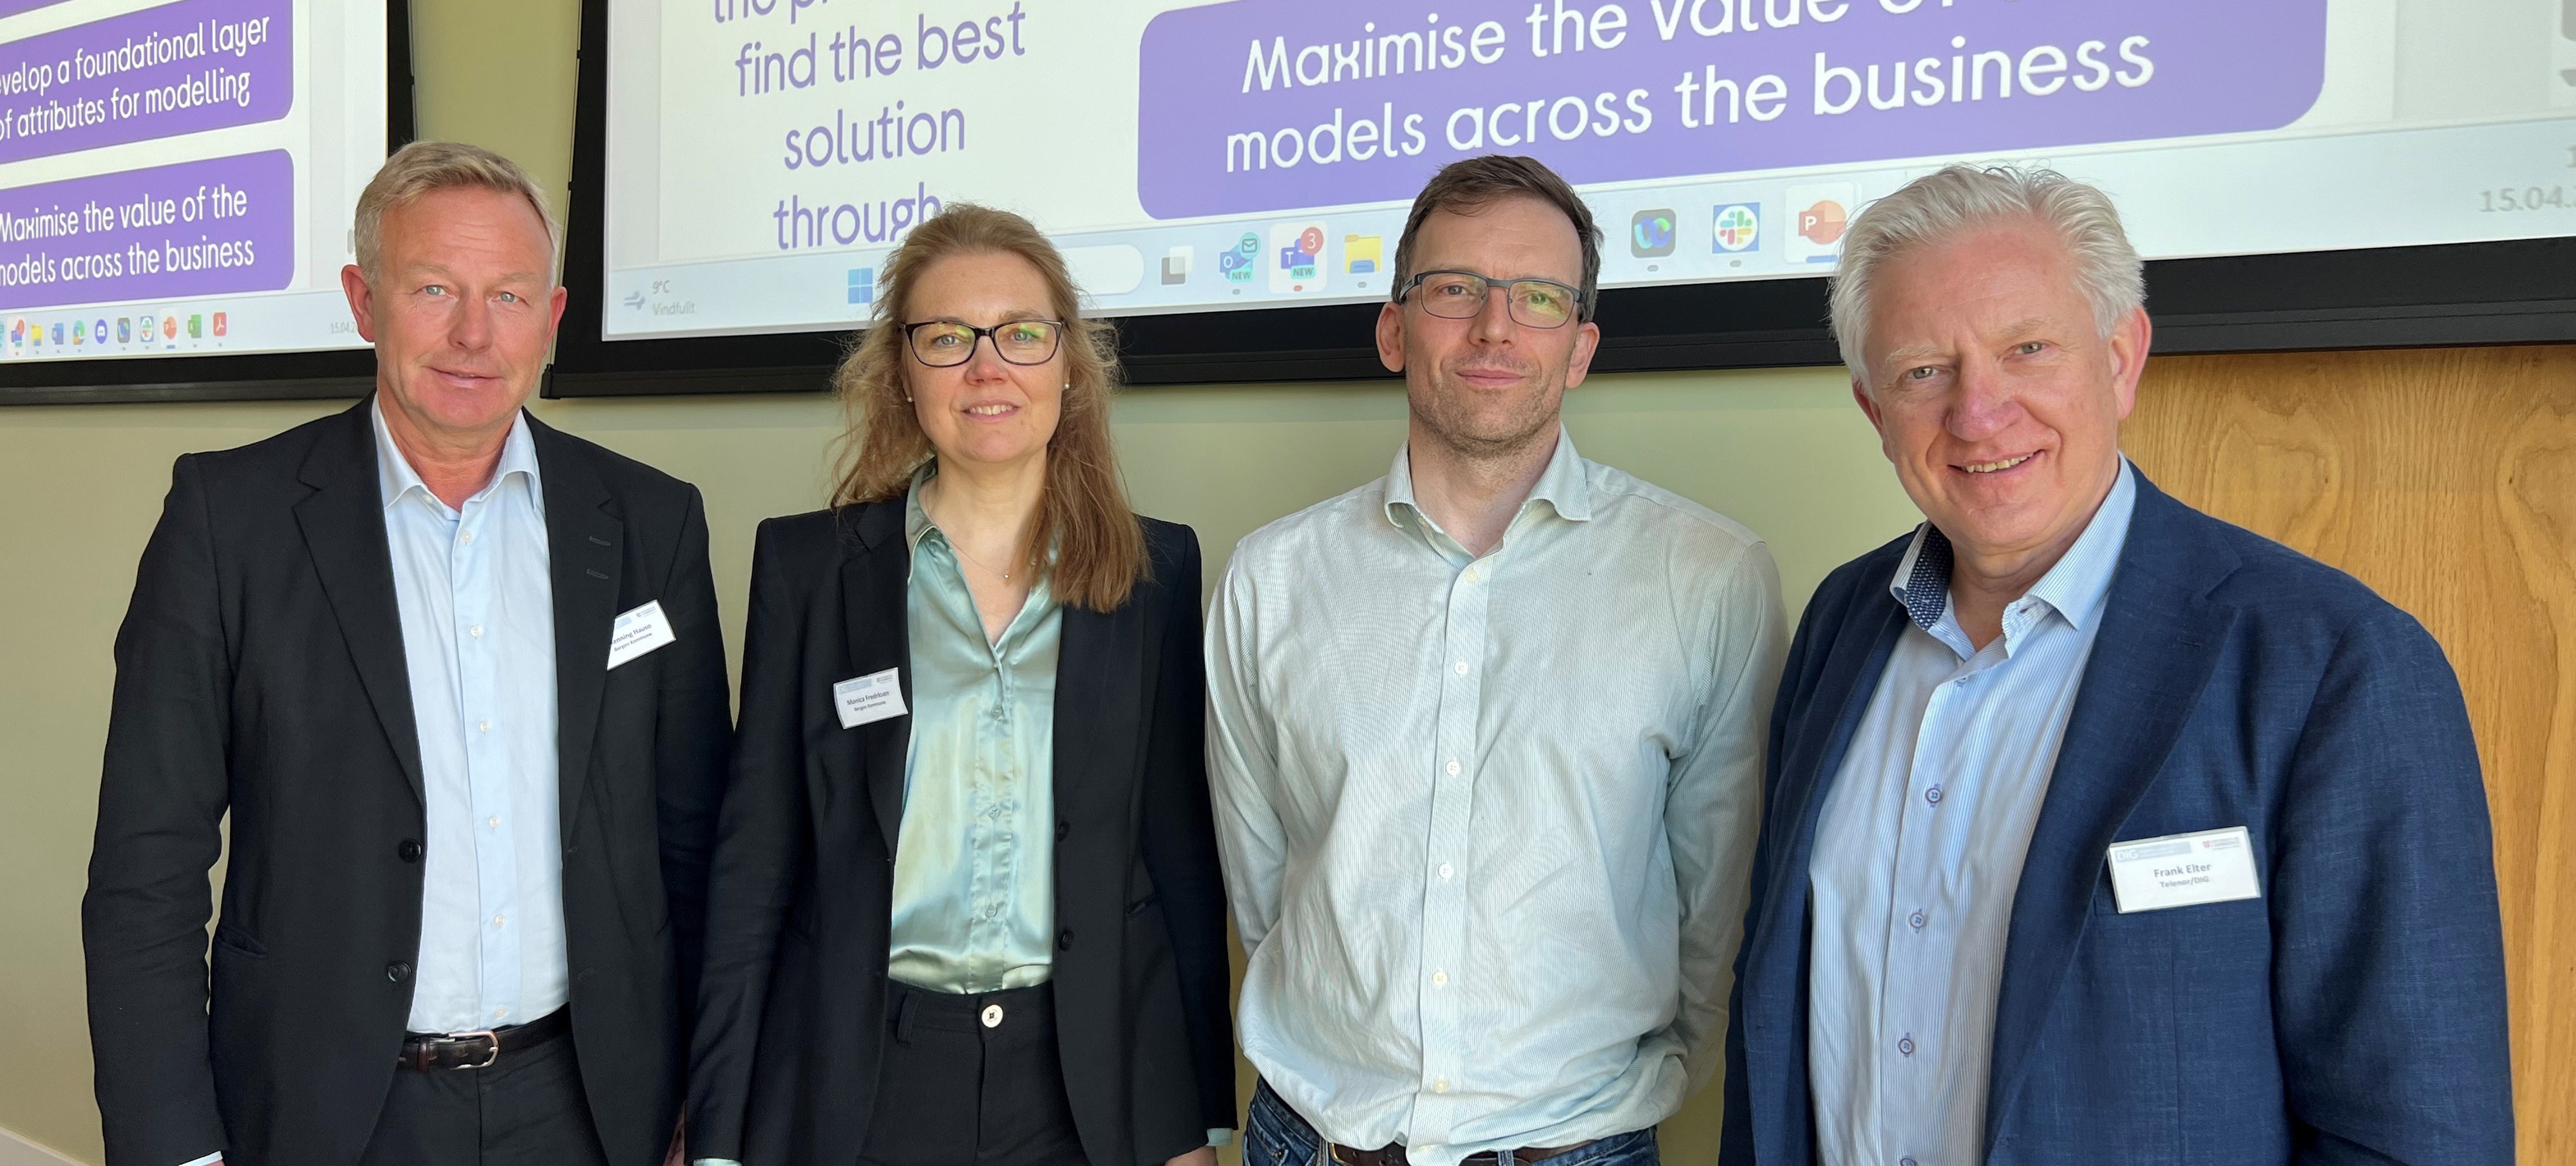 From the left: Henning Hauso and Monica Fredriksen both from Bergen Municipality, Robert Bates from Currys and Frank Elter from Telenor. 